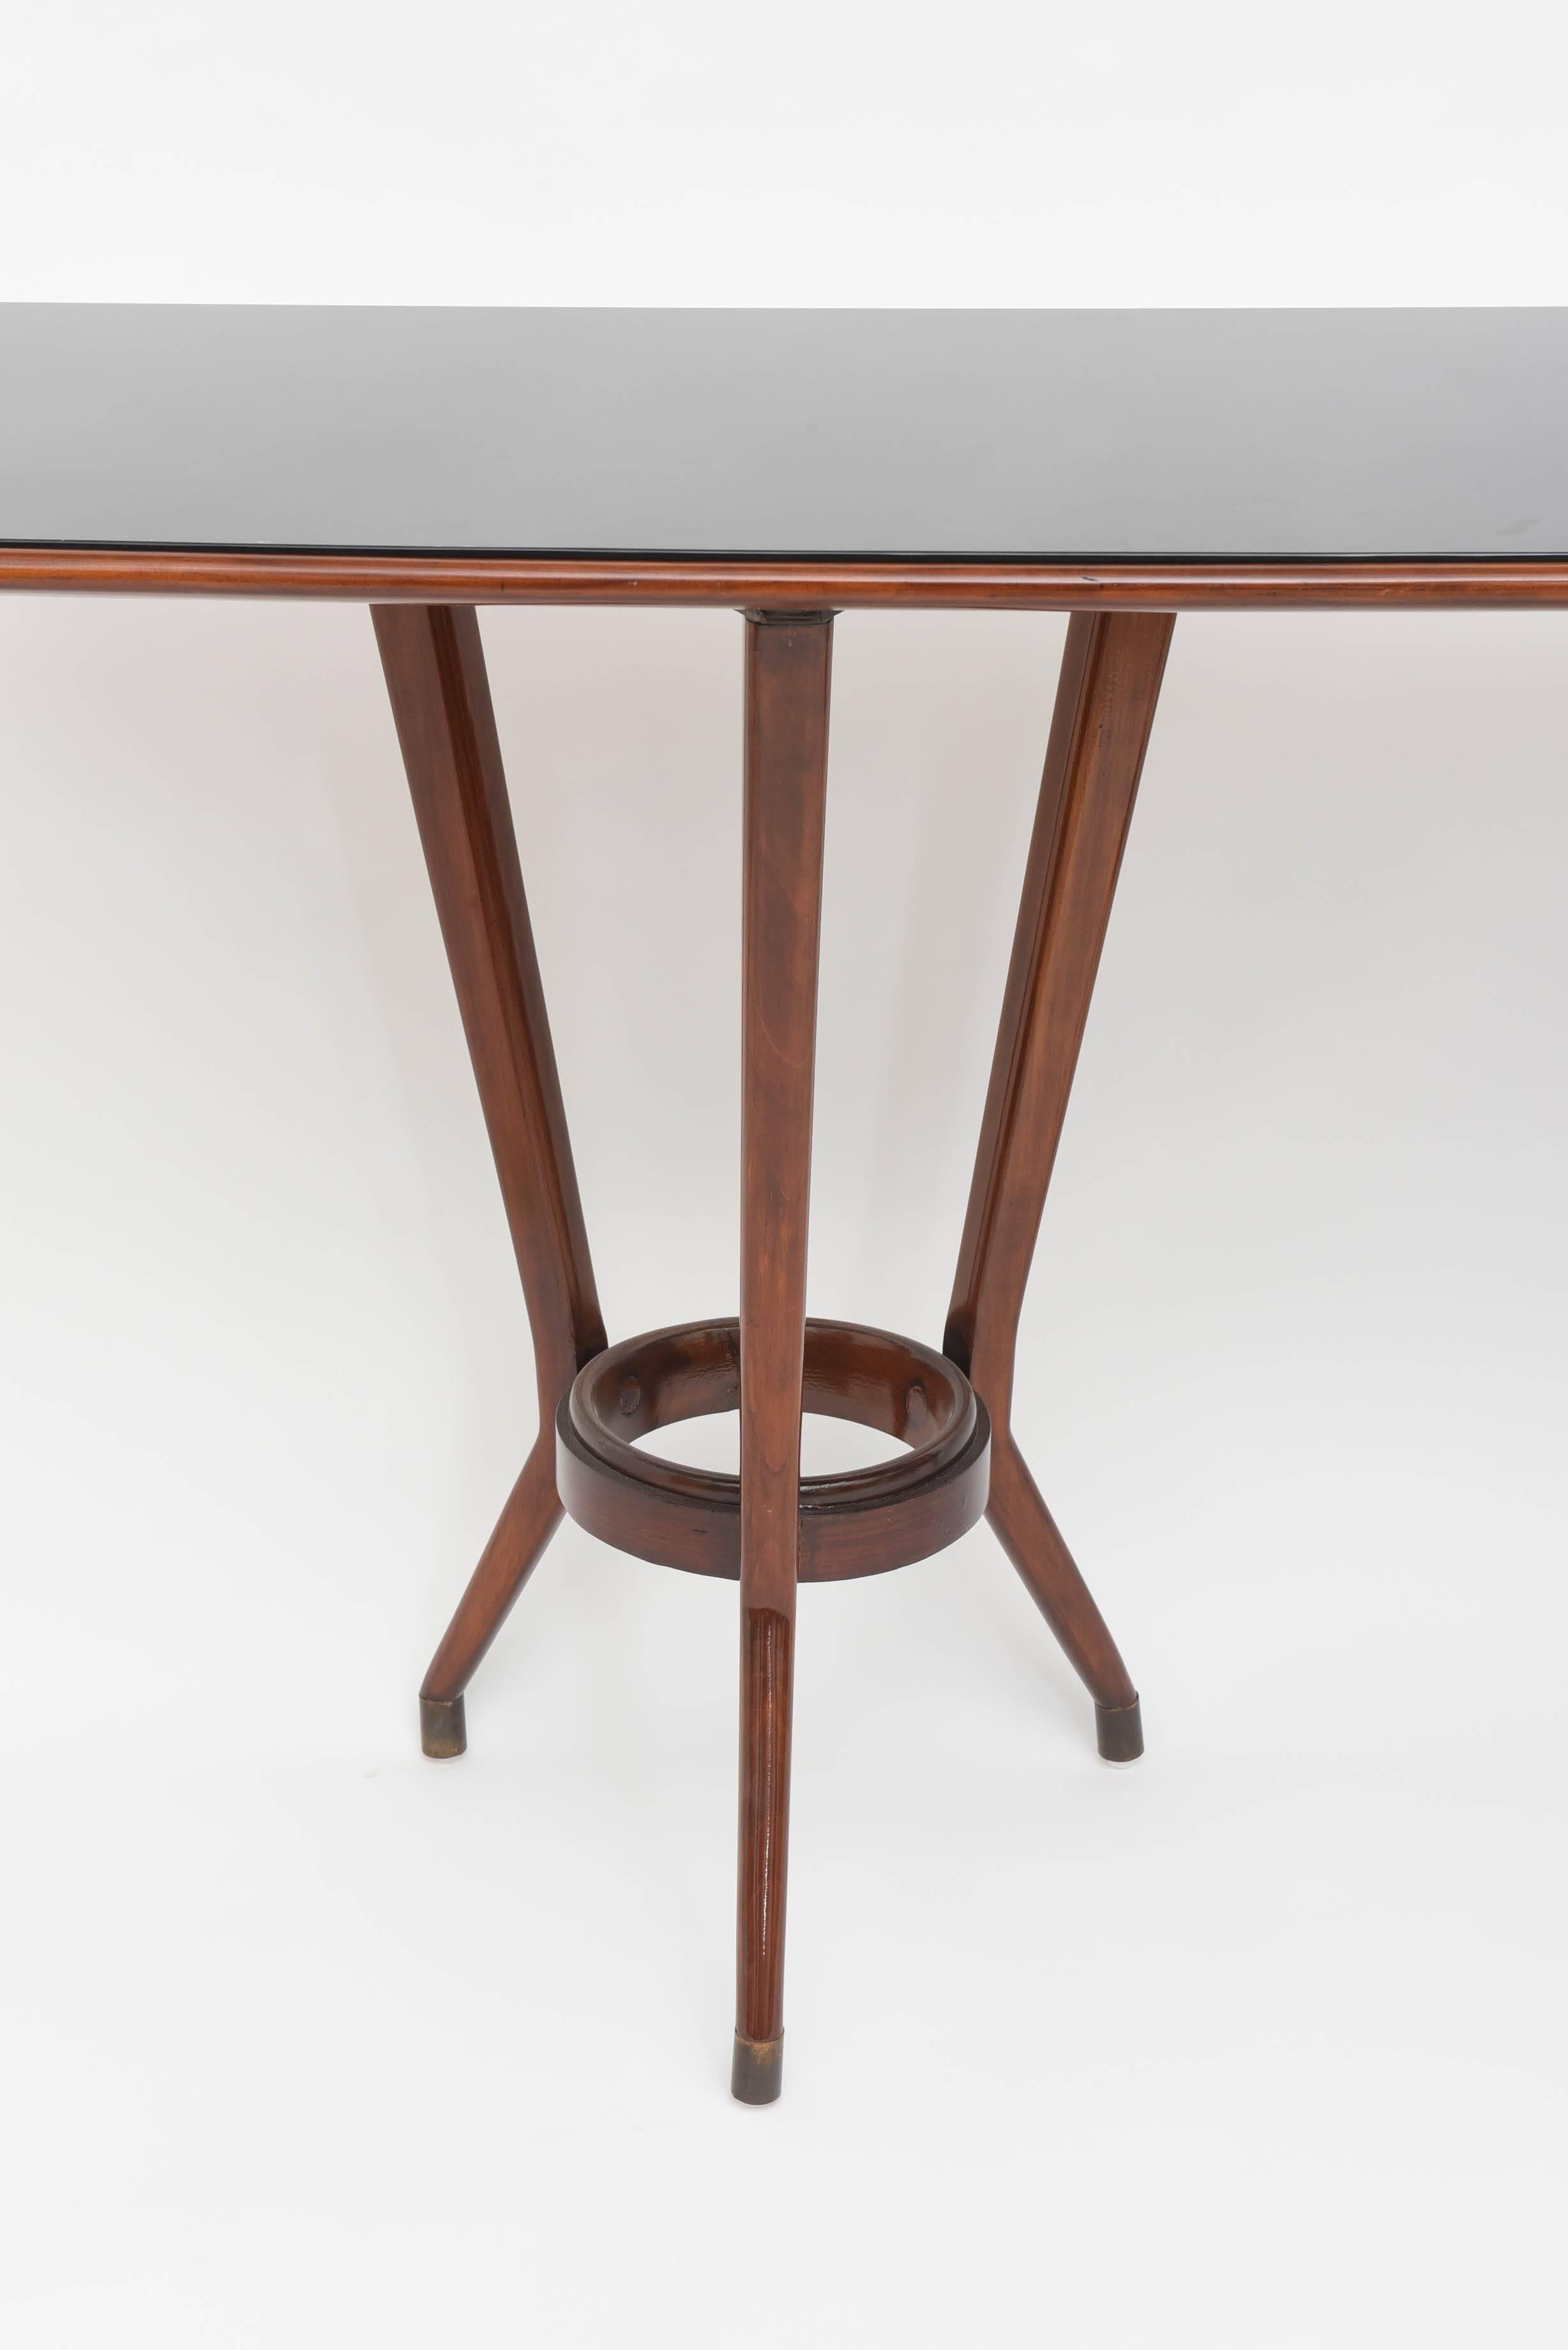 The inset black glass rectangular top with rounded edges with wood trim above two tripartite base supports joined by a ring stretcher,
literature- Guglielmo Ulrich, drawing/rendering of table, p 200.